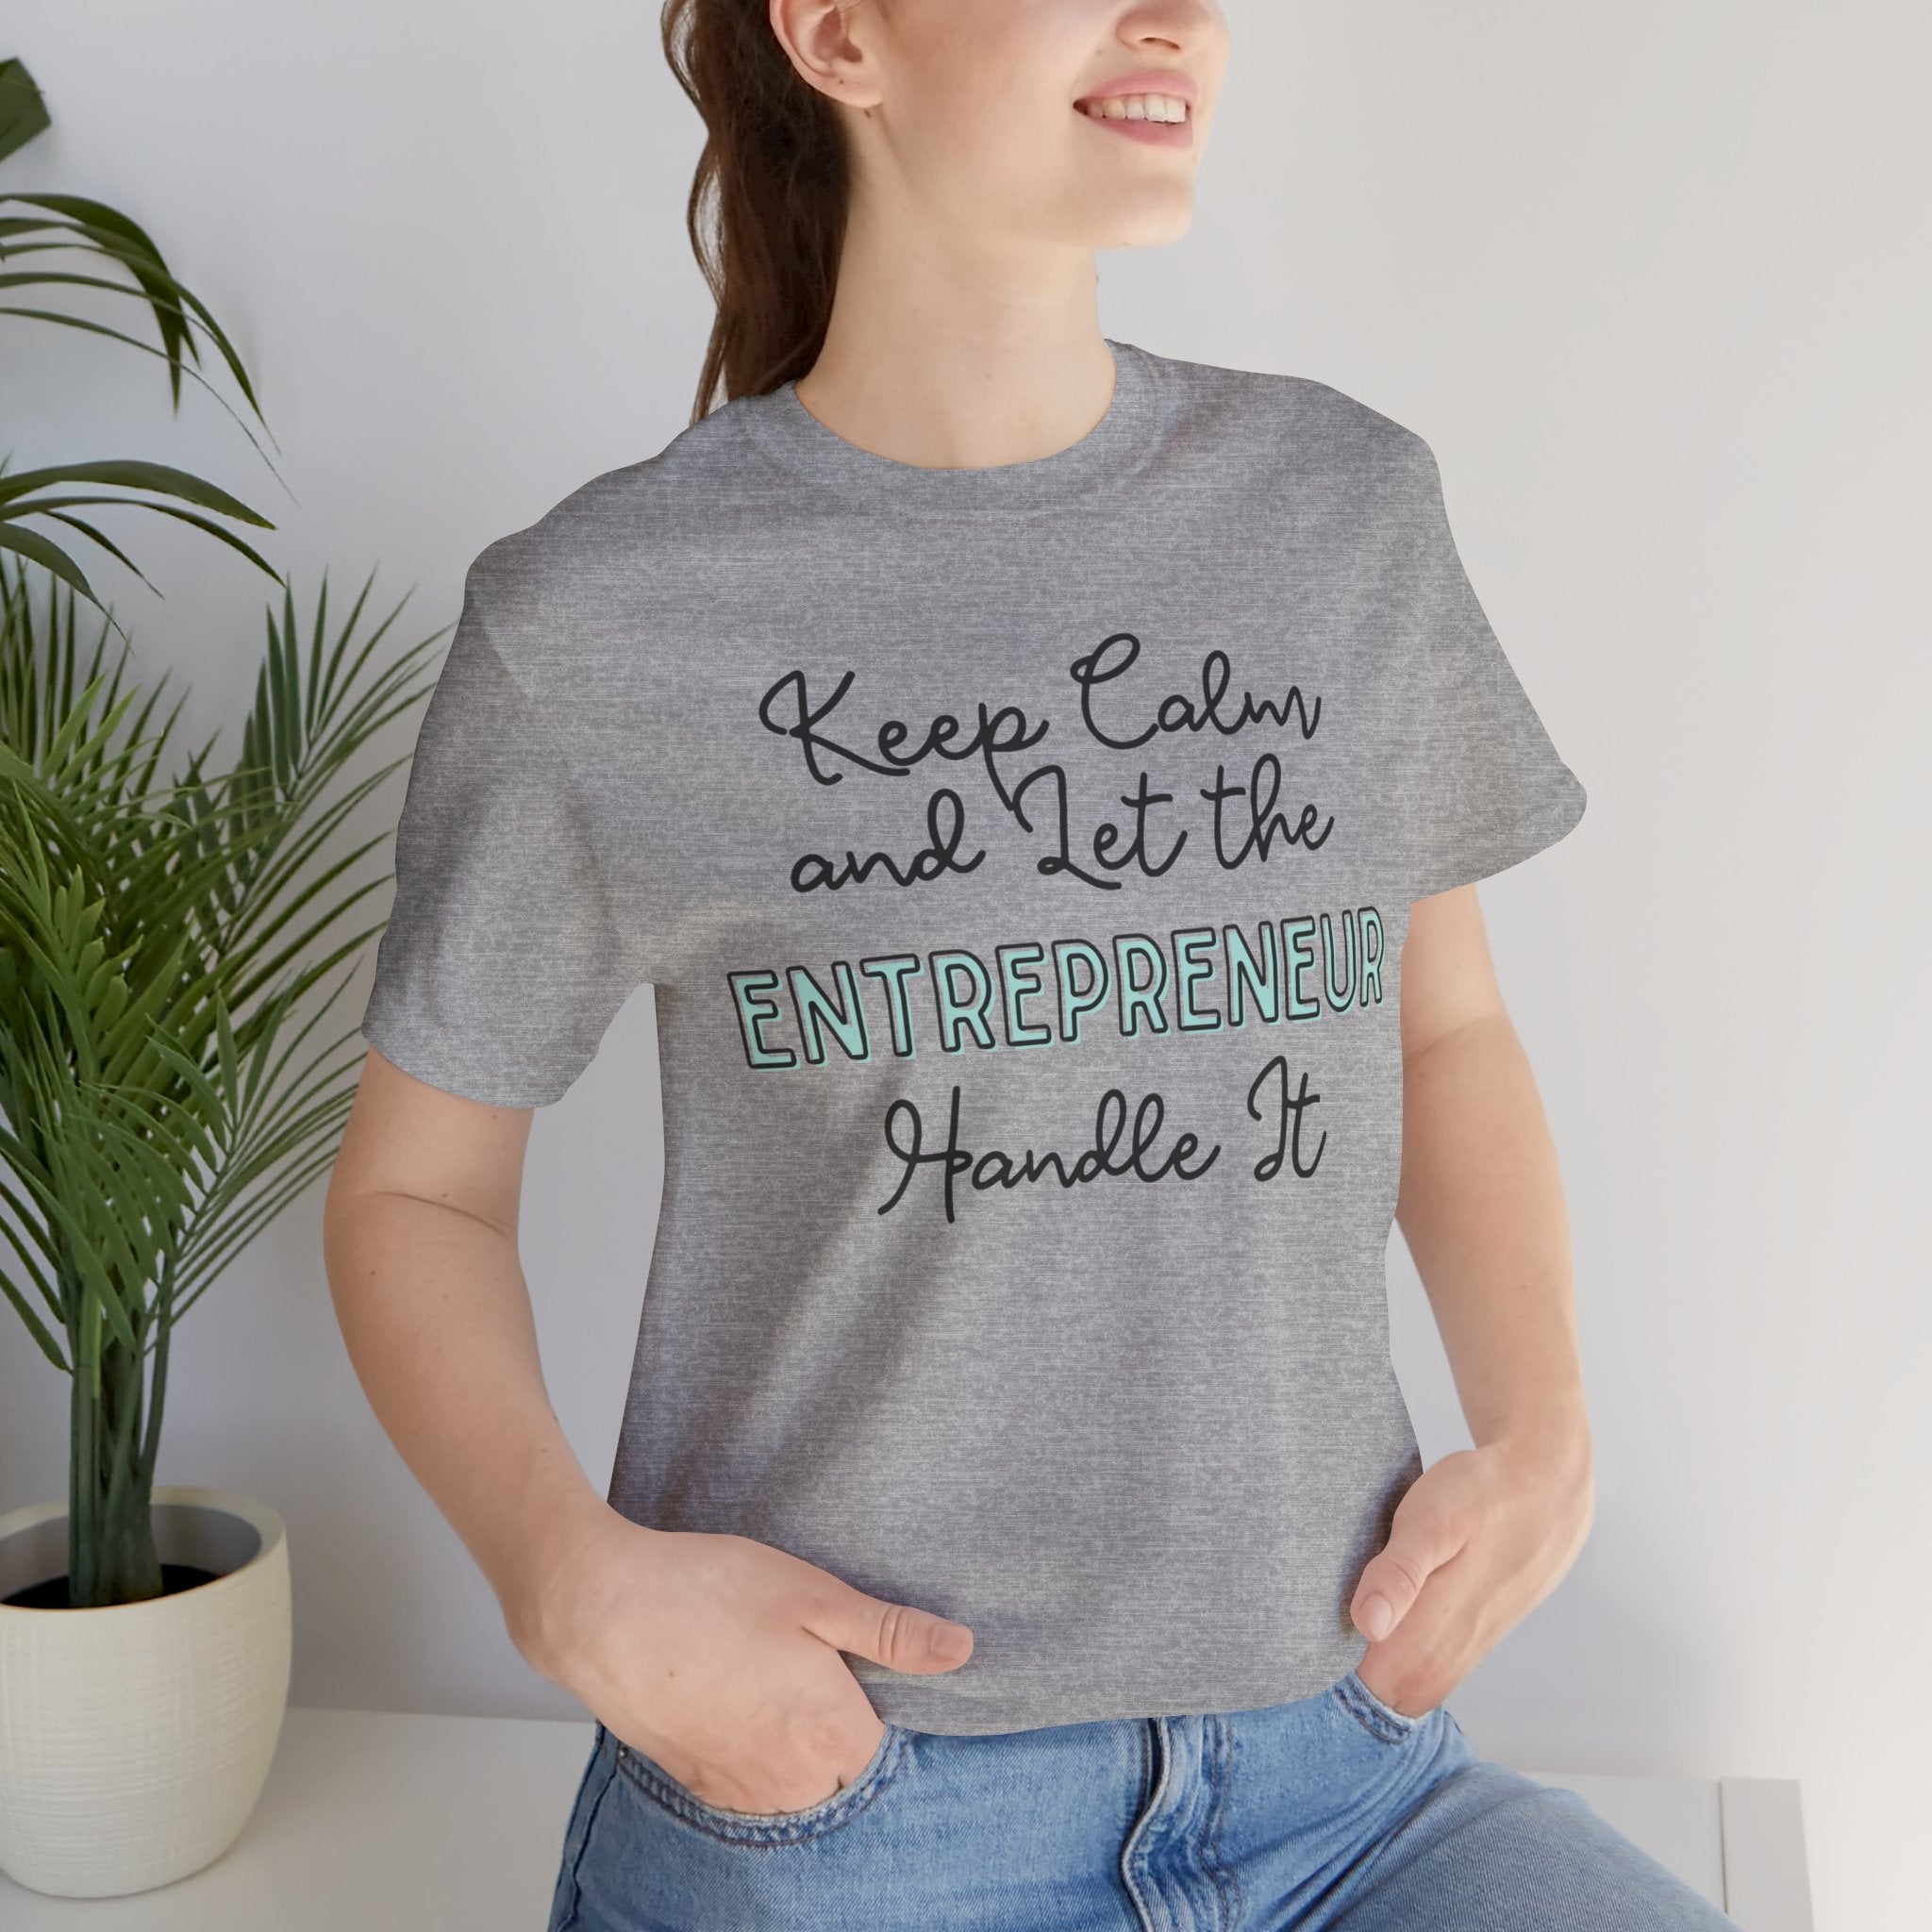 Keep Calm and let the Entrepreneur  handle It - Jersey Short Sleeve Tee